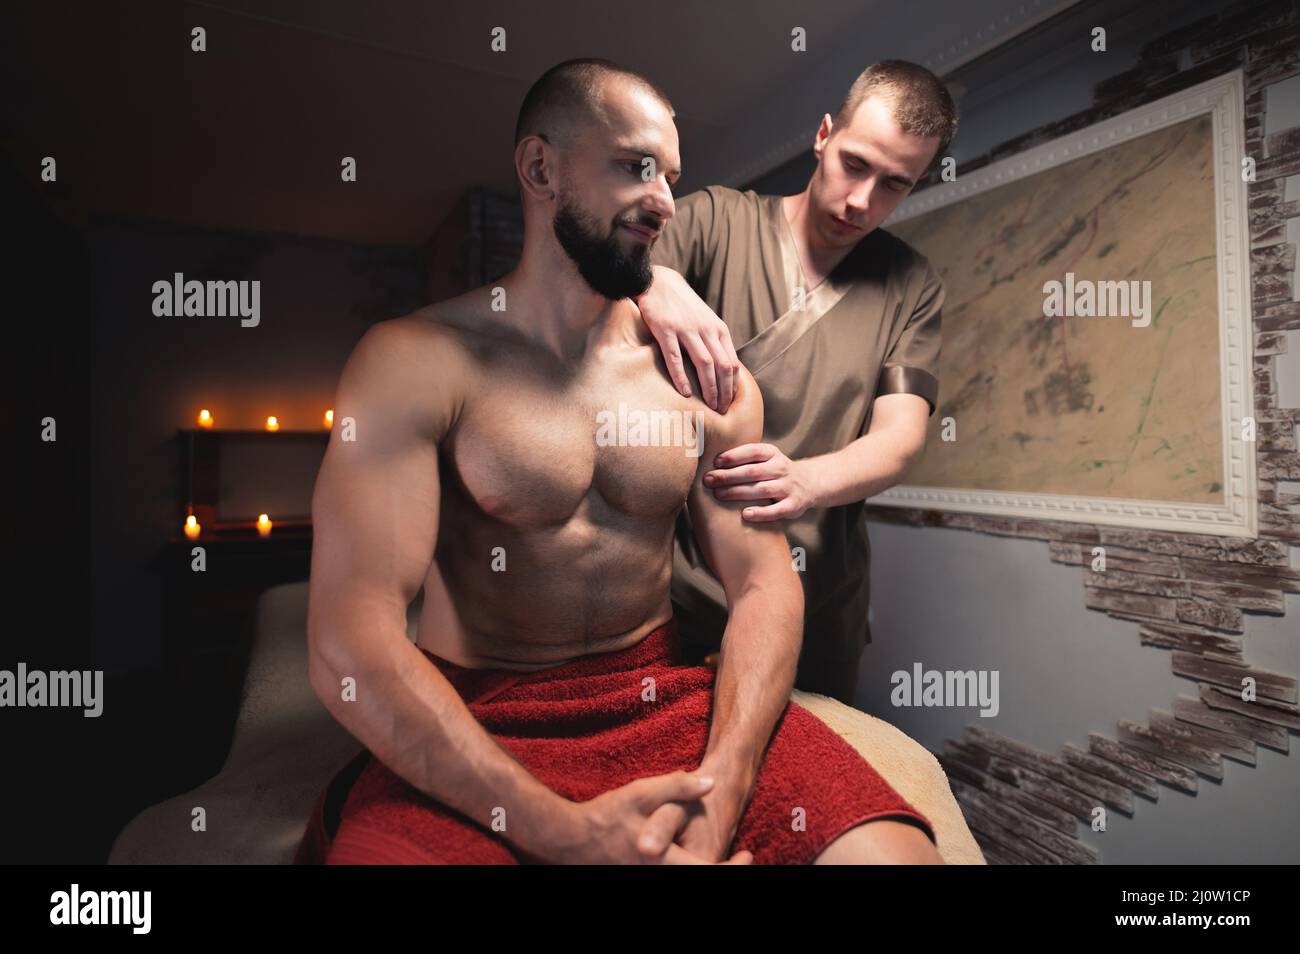 Male masseur does a sports shoulder massage to a muscular male athlete in a room with a contrasting dark light. Professional spo Stock Photo